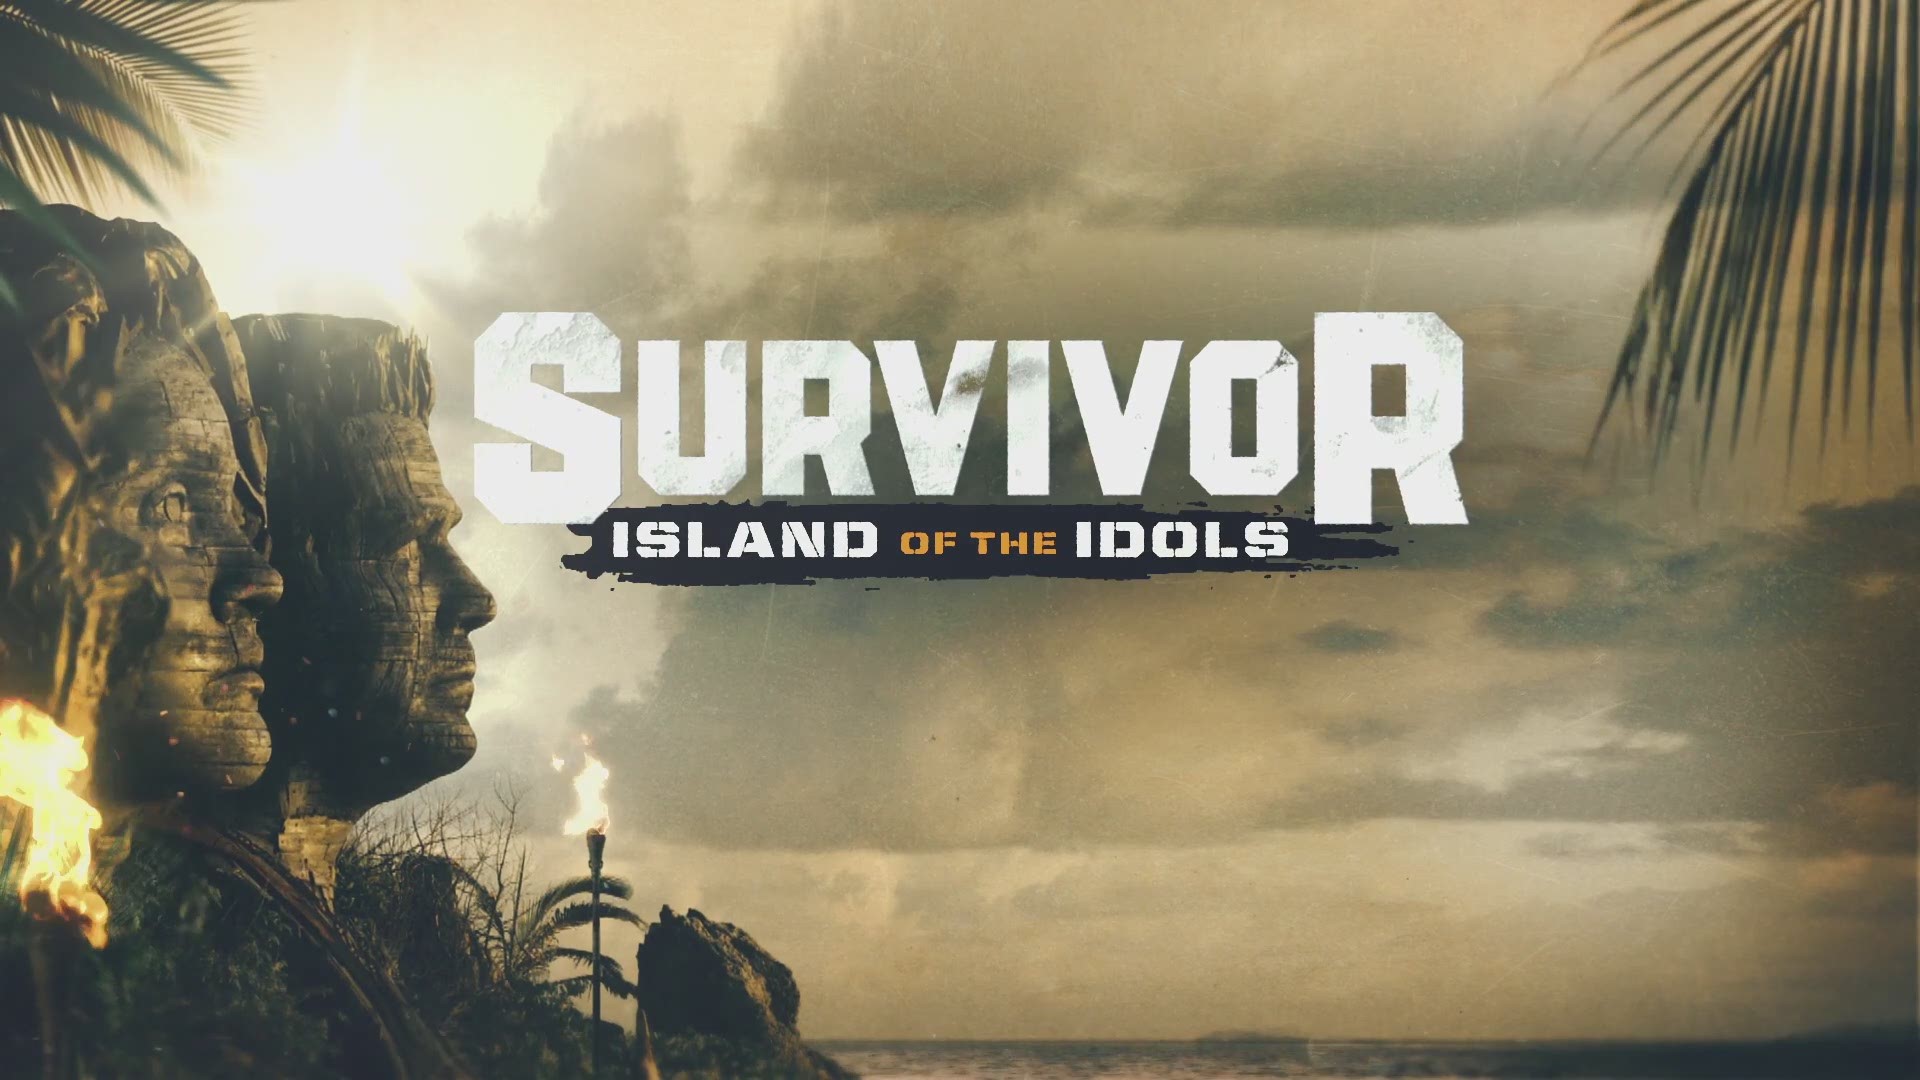 Survivor: “Island of the Idols” premieres Wednesday, September 25 with a special 90-minute edition on WTOL.